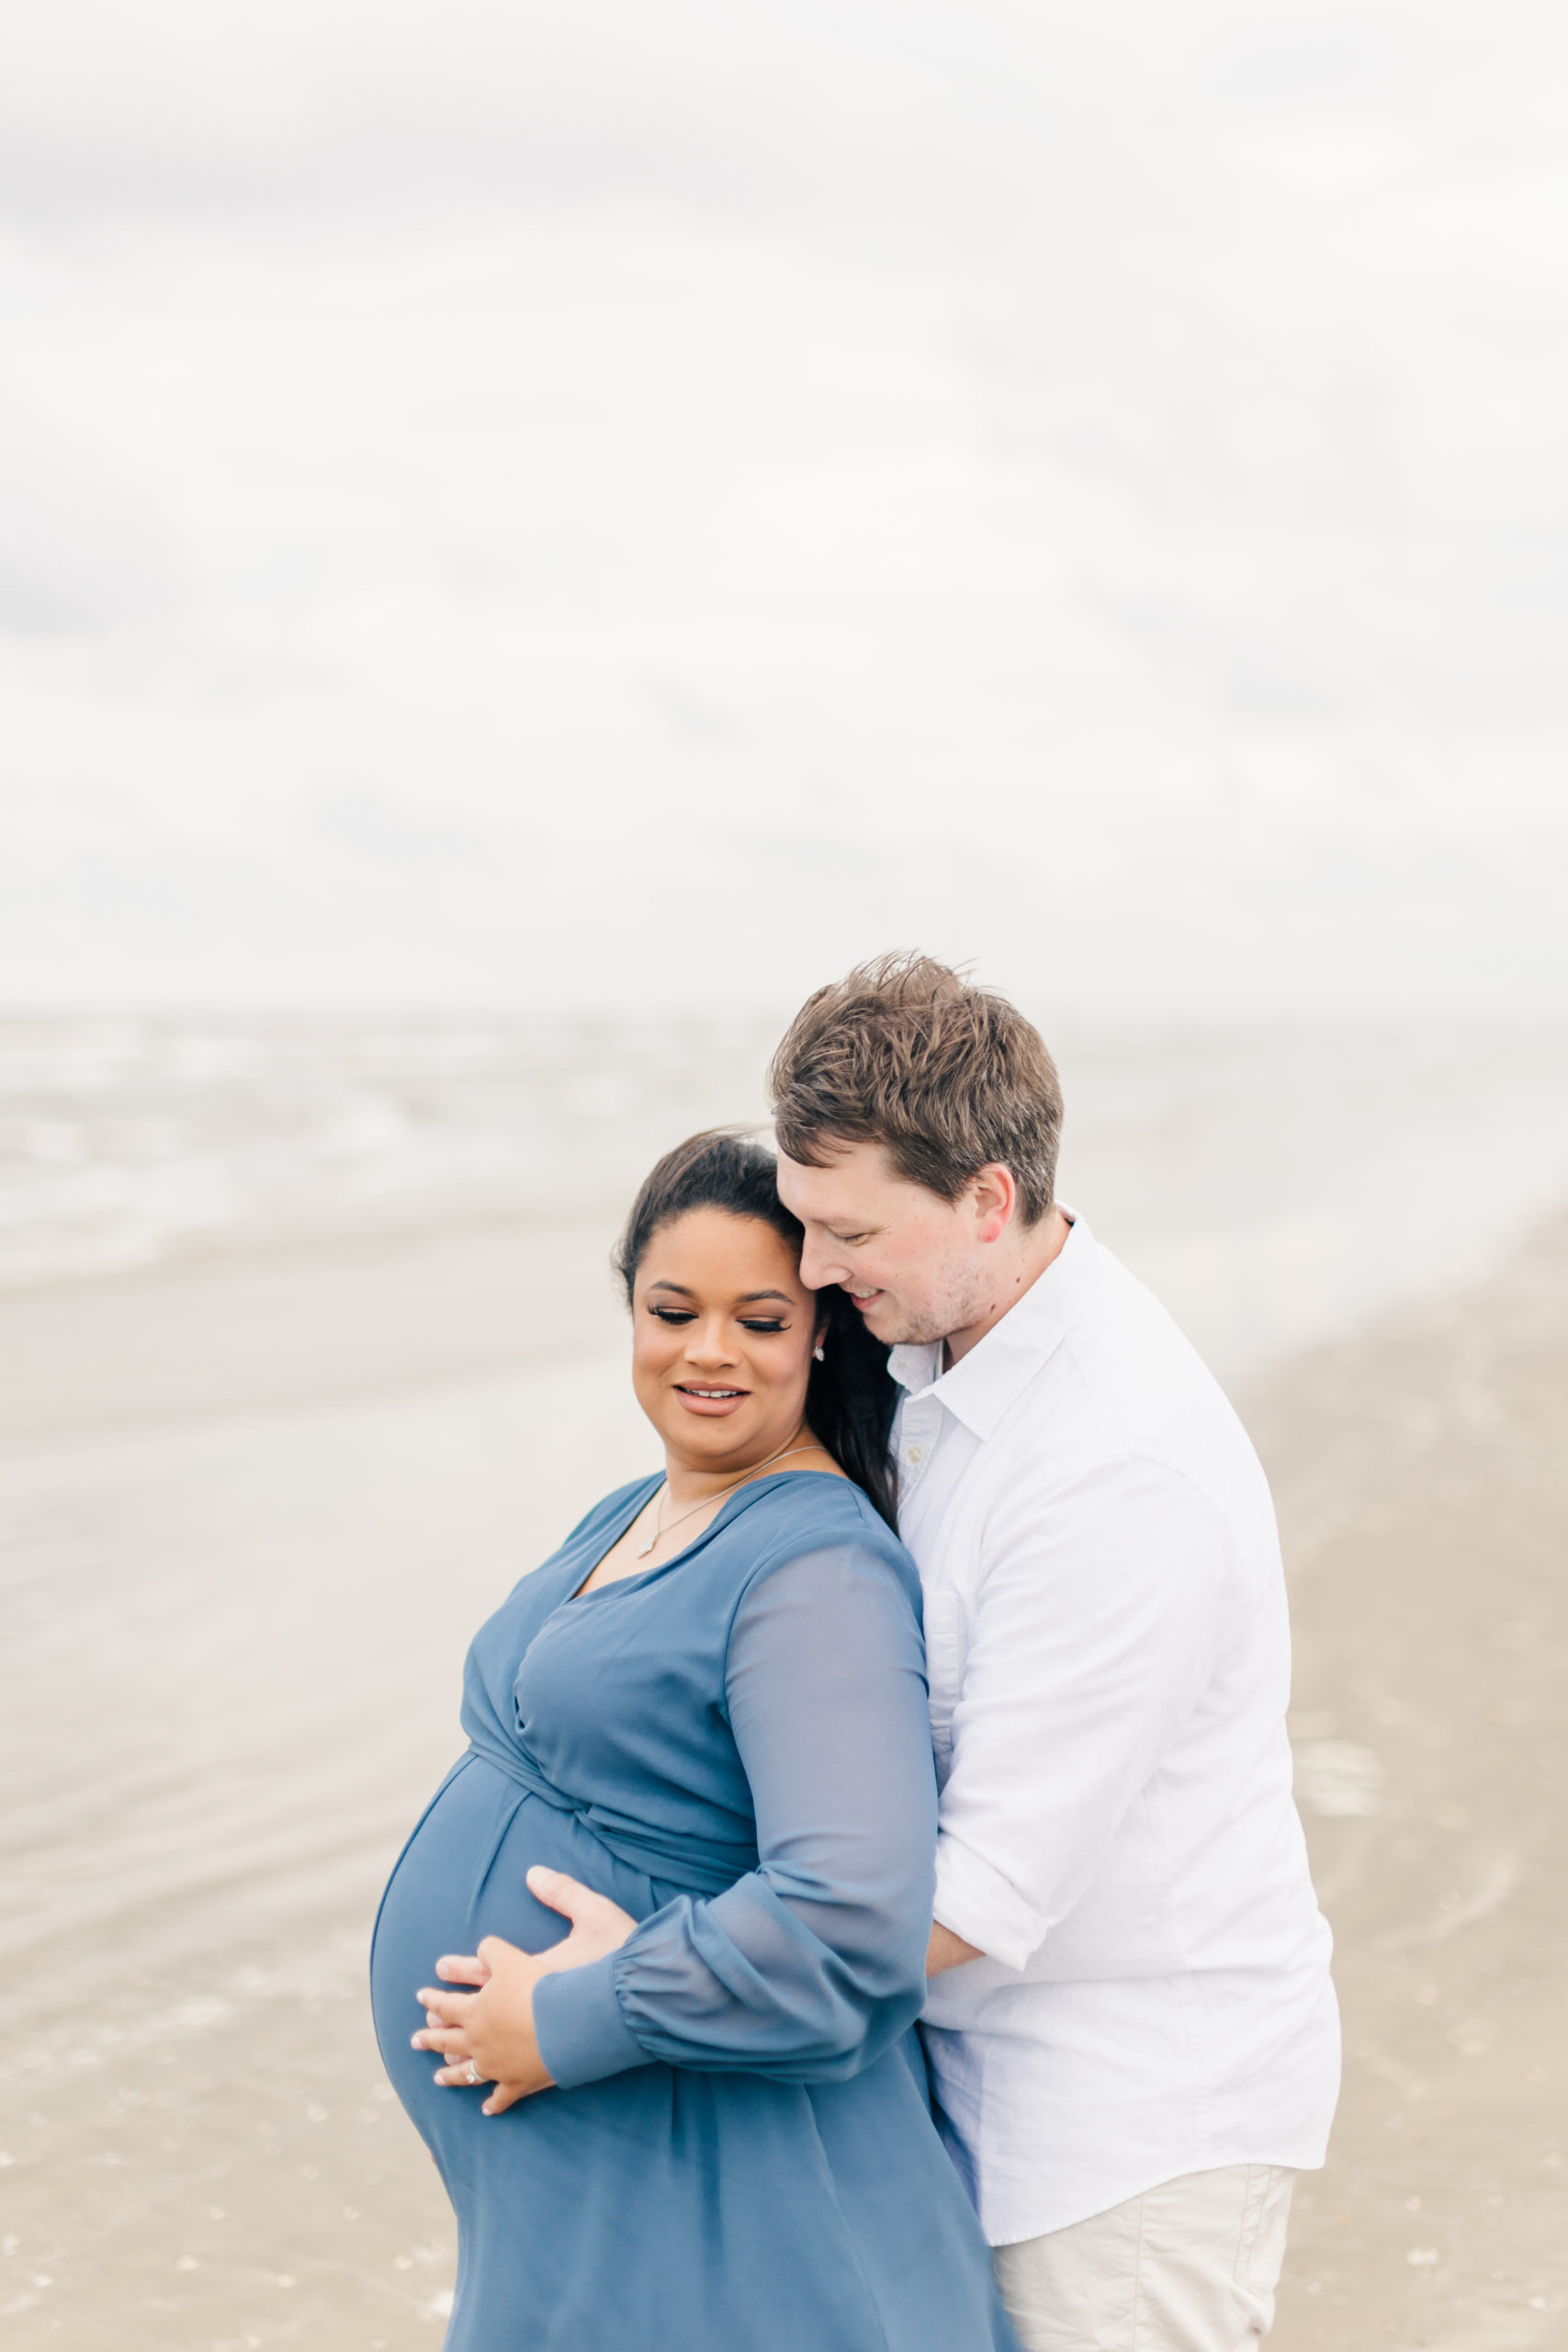 During this beach maternity session held at Galveston Beach, Monette Anne Photography captures this soon-to-be father hold his pregnant wife from behind. man hugging wife from behind gray blue long sleeve maternity dress beach maternity session houston texas #GalvestonBeach #HoustonTexasMaternityPhotographer #HoustonTexasCouplesPhotographer #PiratesBeachTexas #MaternitySession #MonetteAnnePhotography #GalvestonBeachMaternitySession #MaternityClothes #BeachMaternitySession